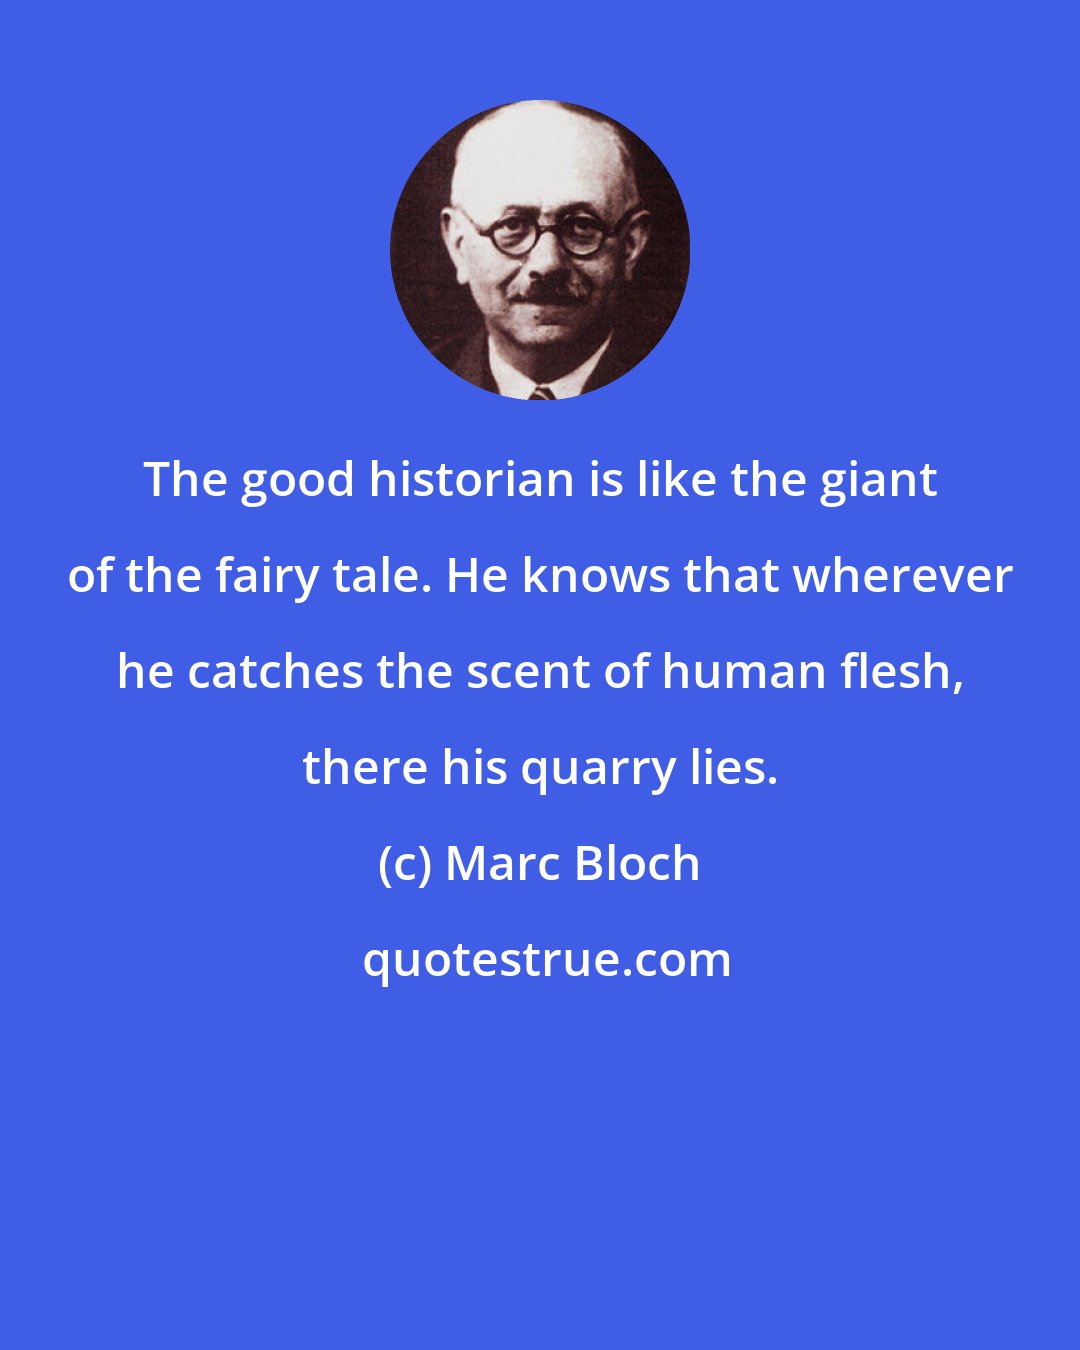 Marc Bloch: The good historian is like the giant of the fairy tale. He knows that wherever he catches the scent of human flesh, there his quarry lies.